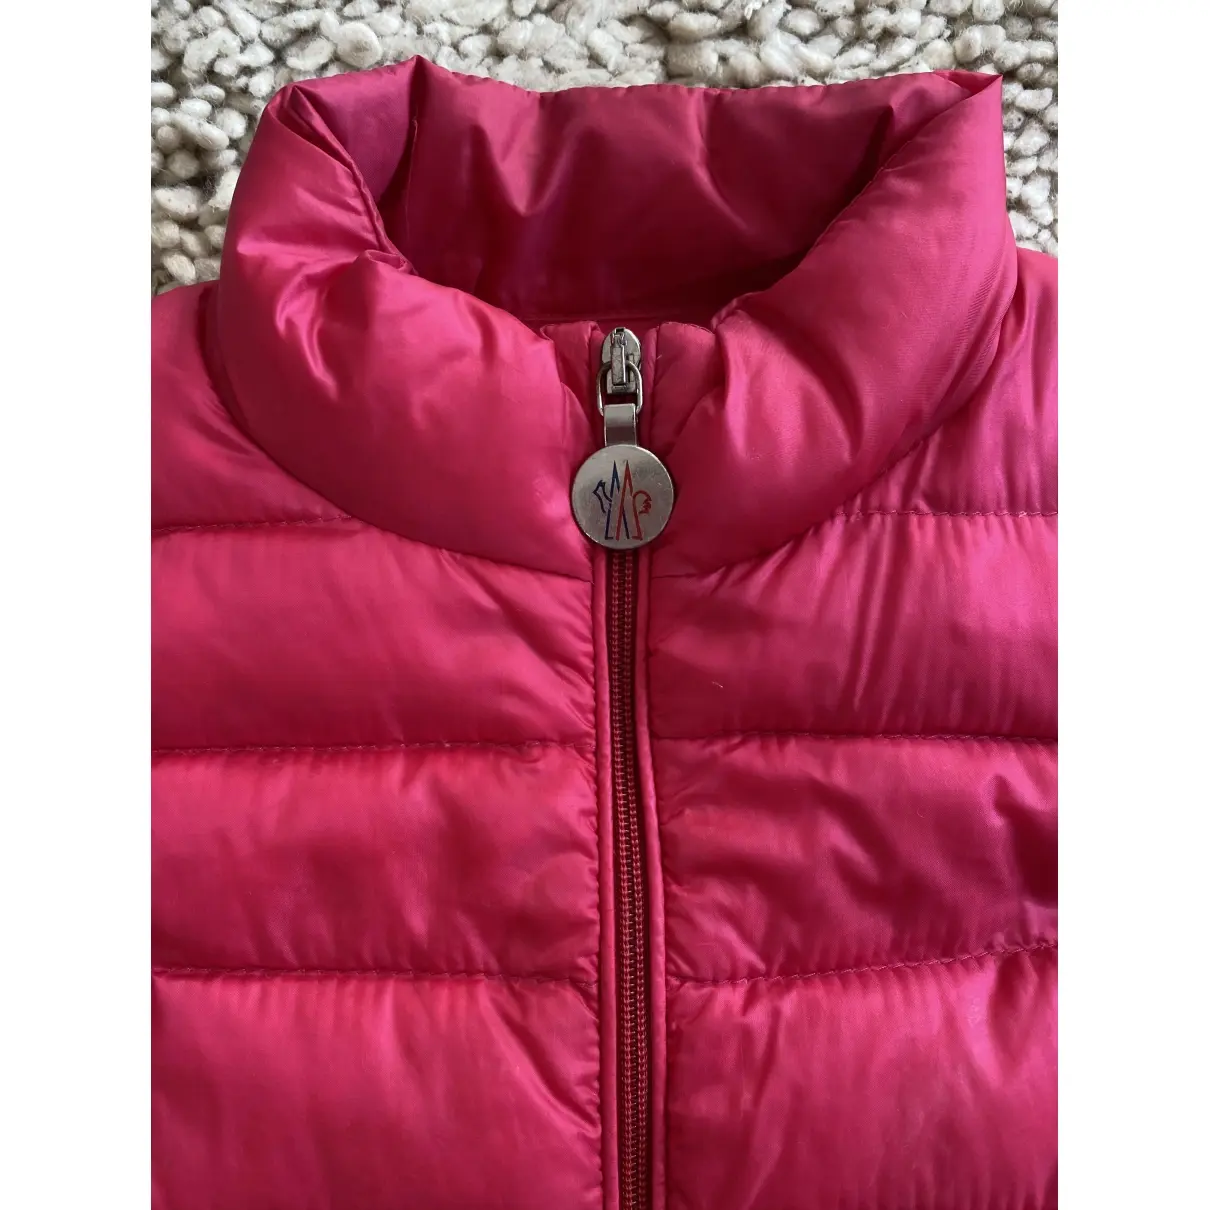 Moncler Classic jacket for sale